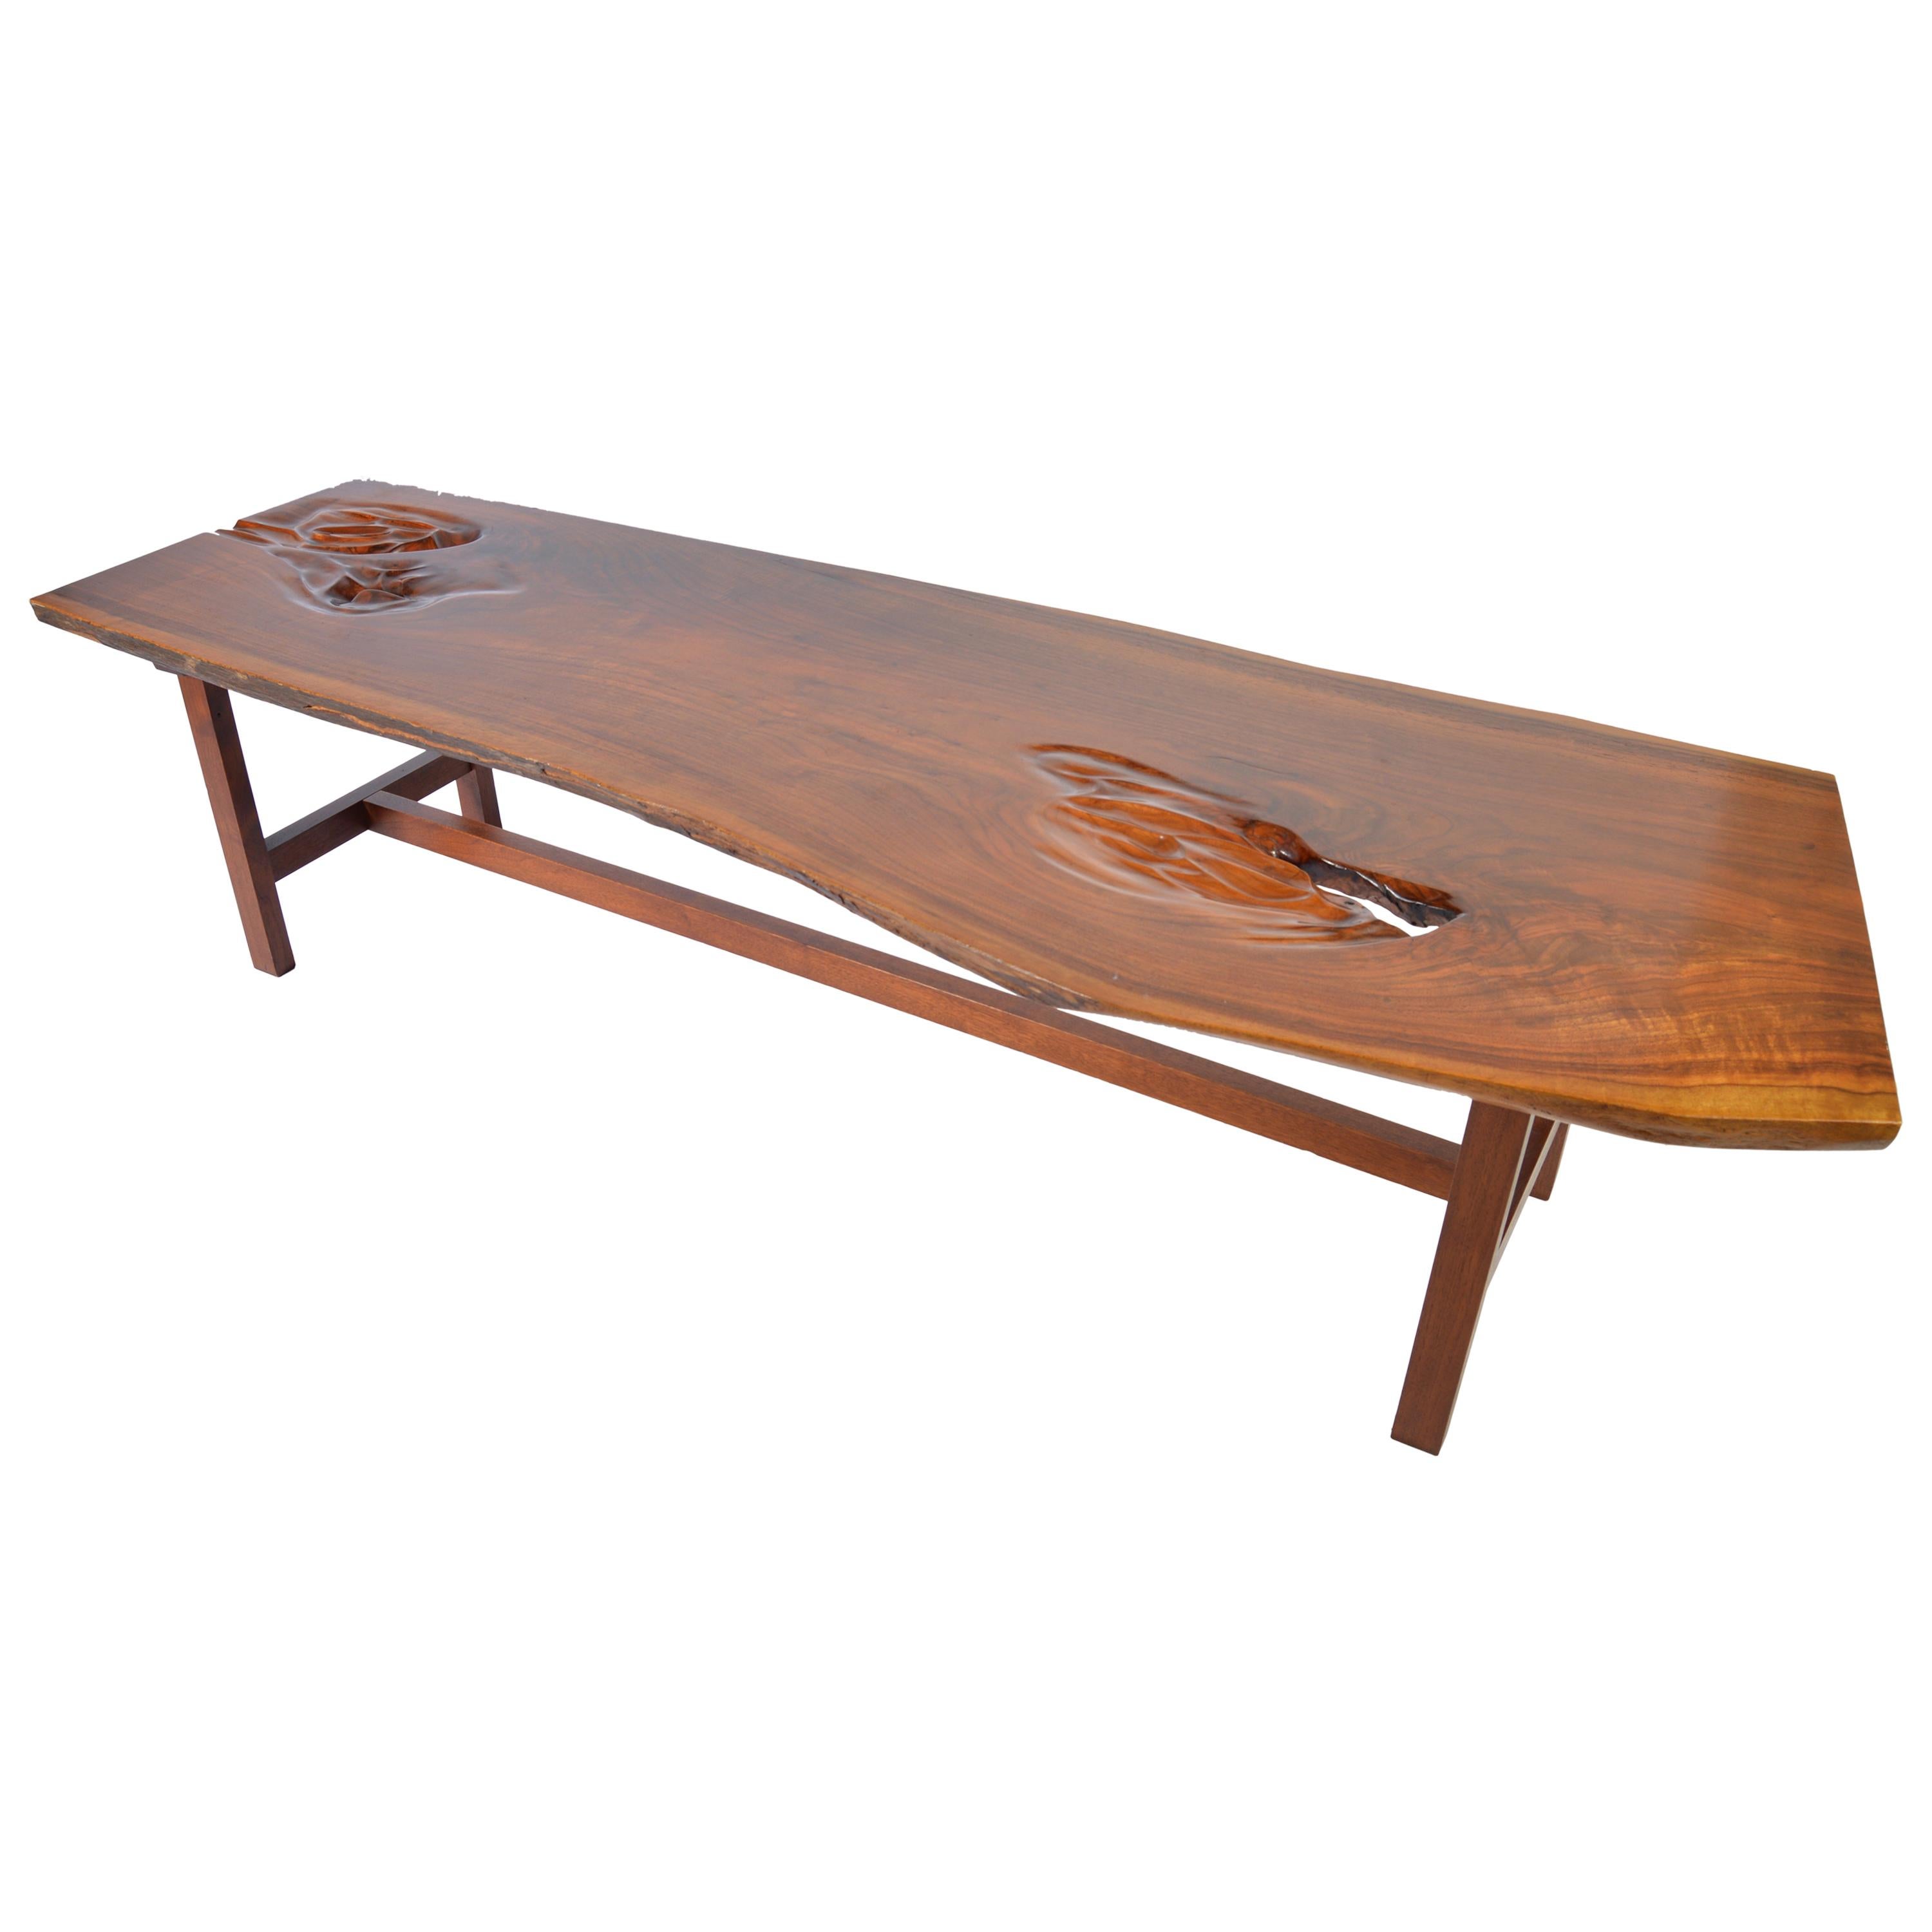 Early James Martin Free Edge Coffee Table, Signed 1962